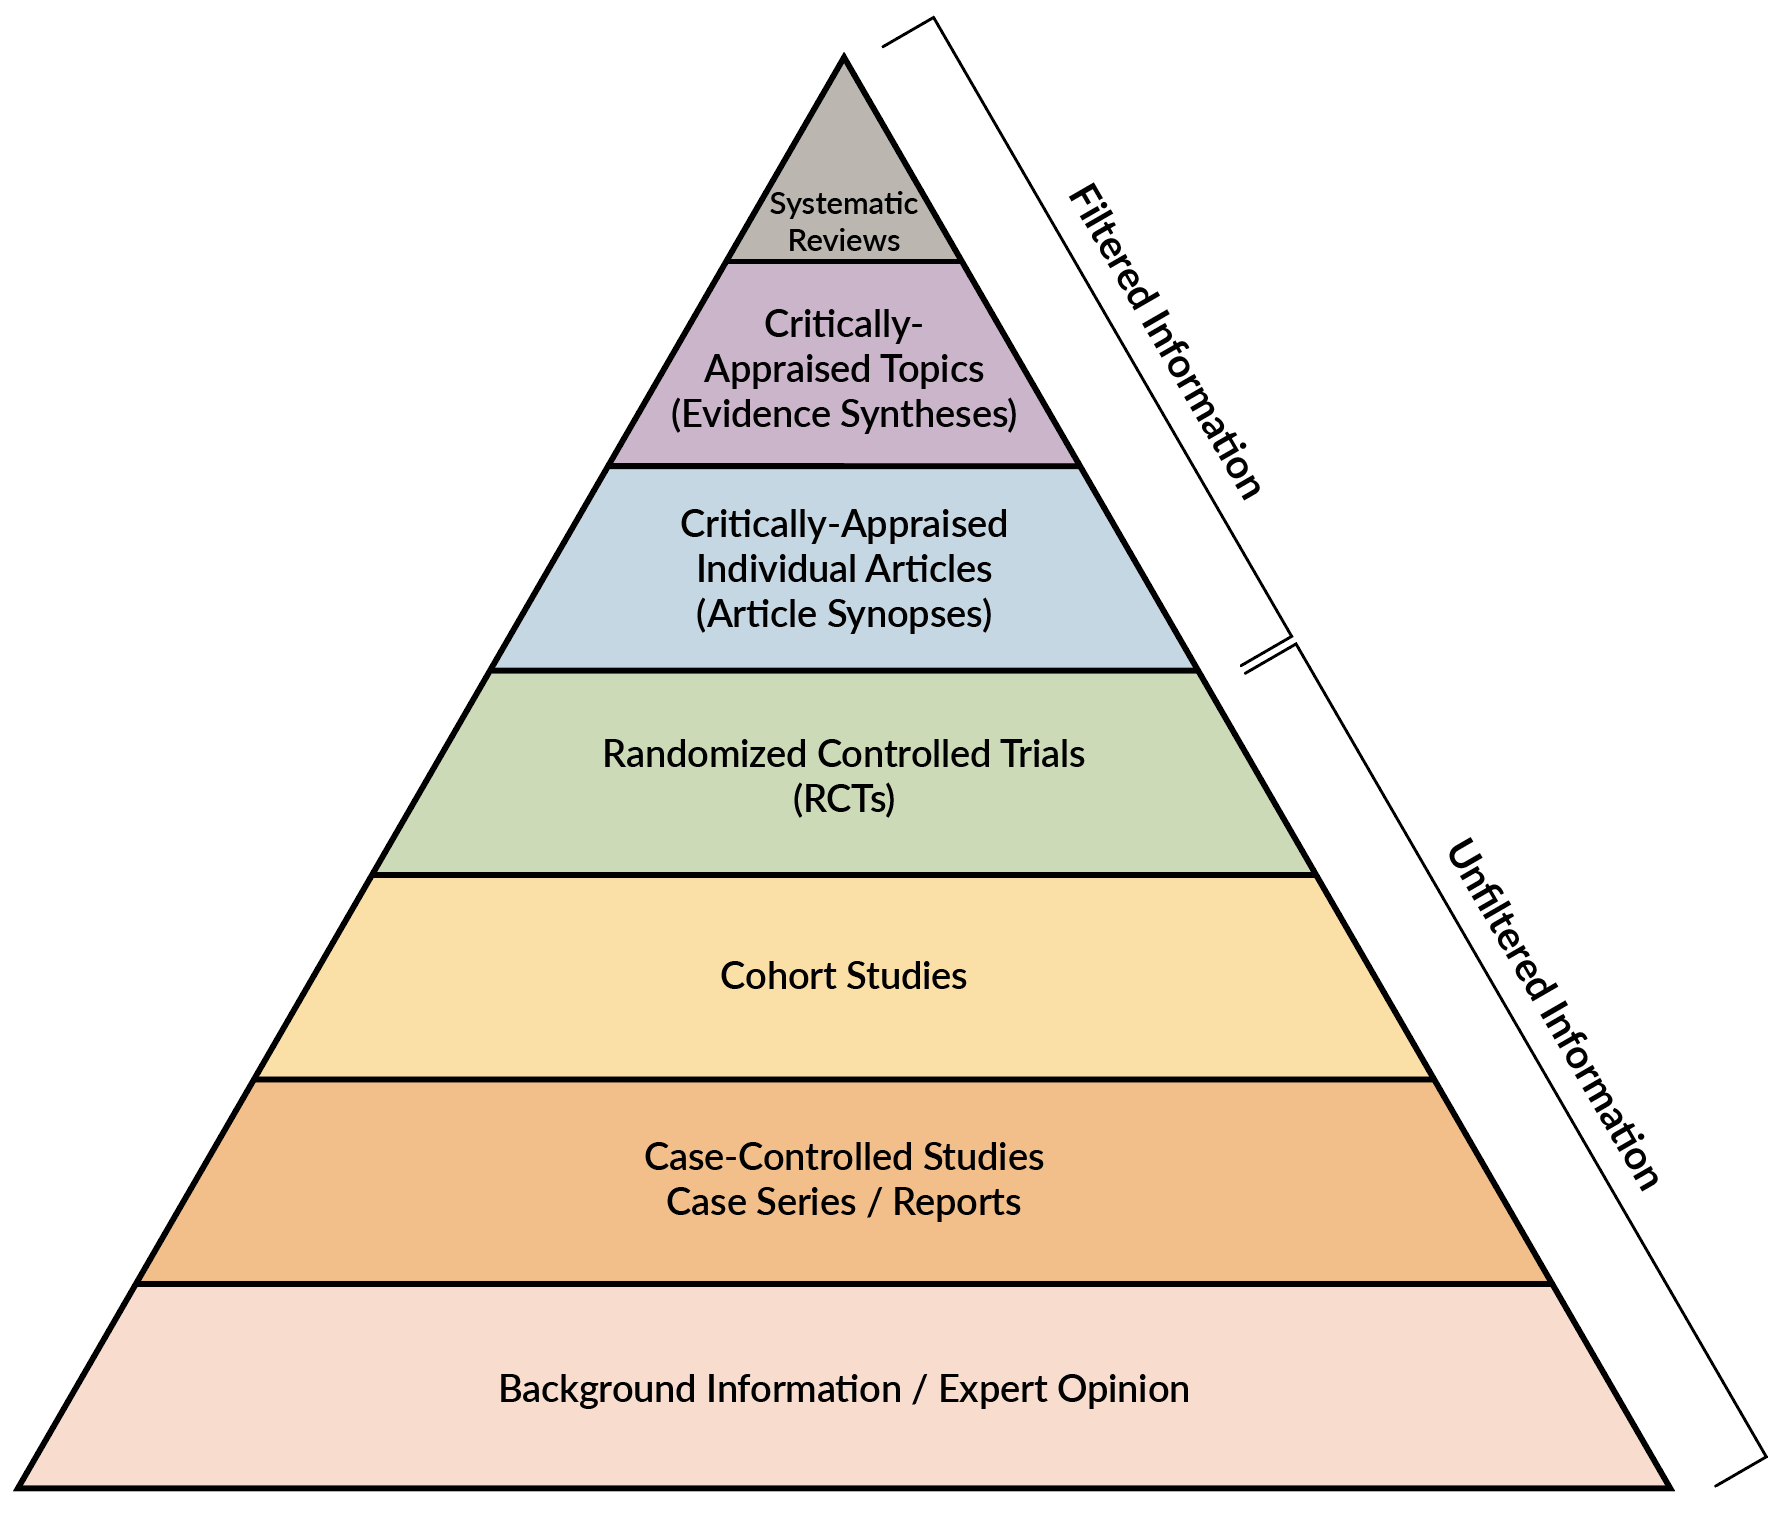 Figure 1. Research Design & Evidence Chart, redrawn based on a chart by CFCF
[CC BY-SA 4.0] (See https://en.wikipedia.org/wiki/Evidence-based_education)